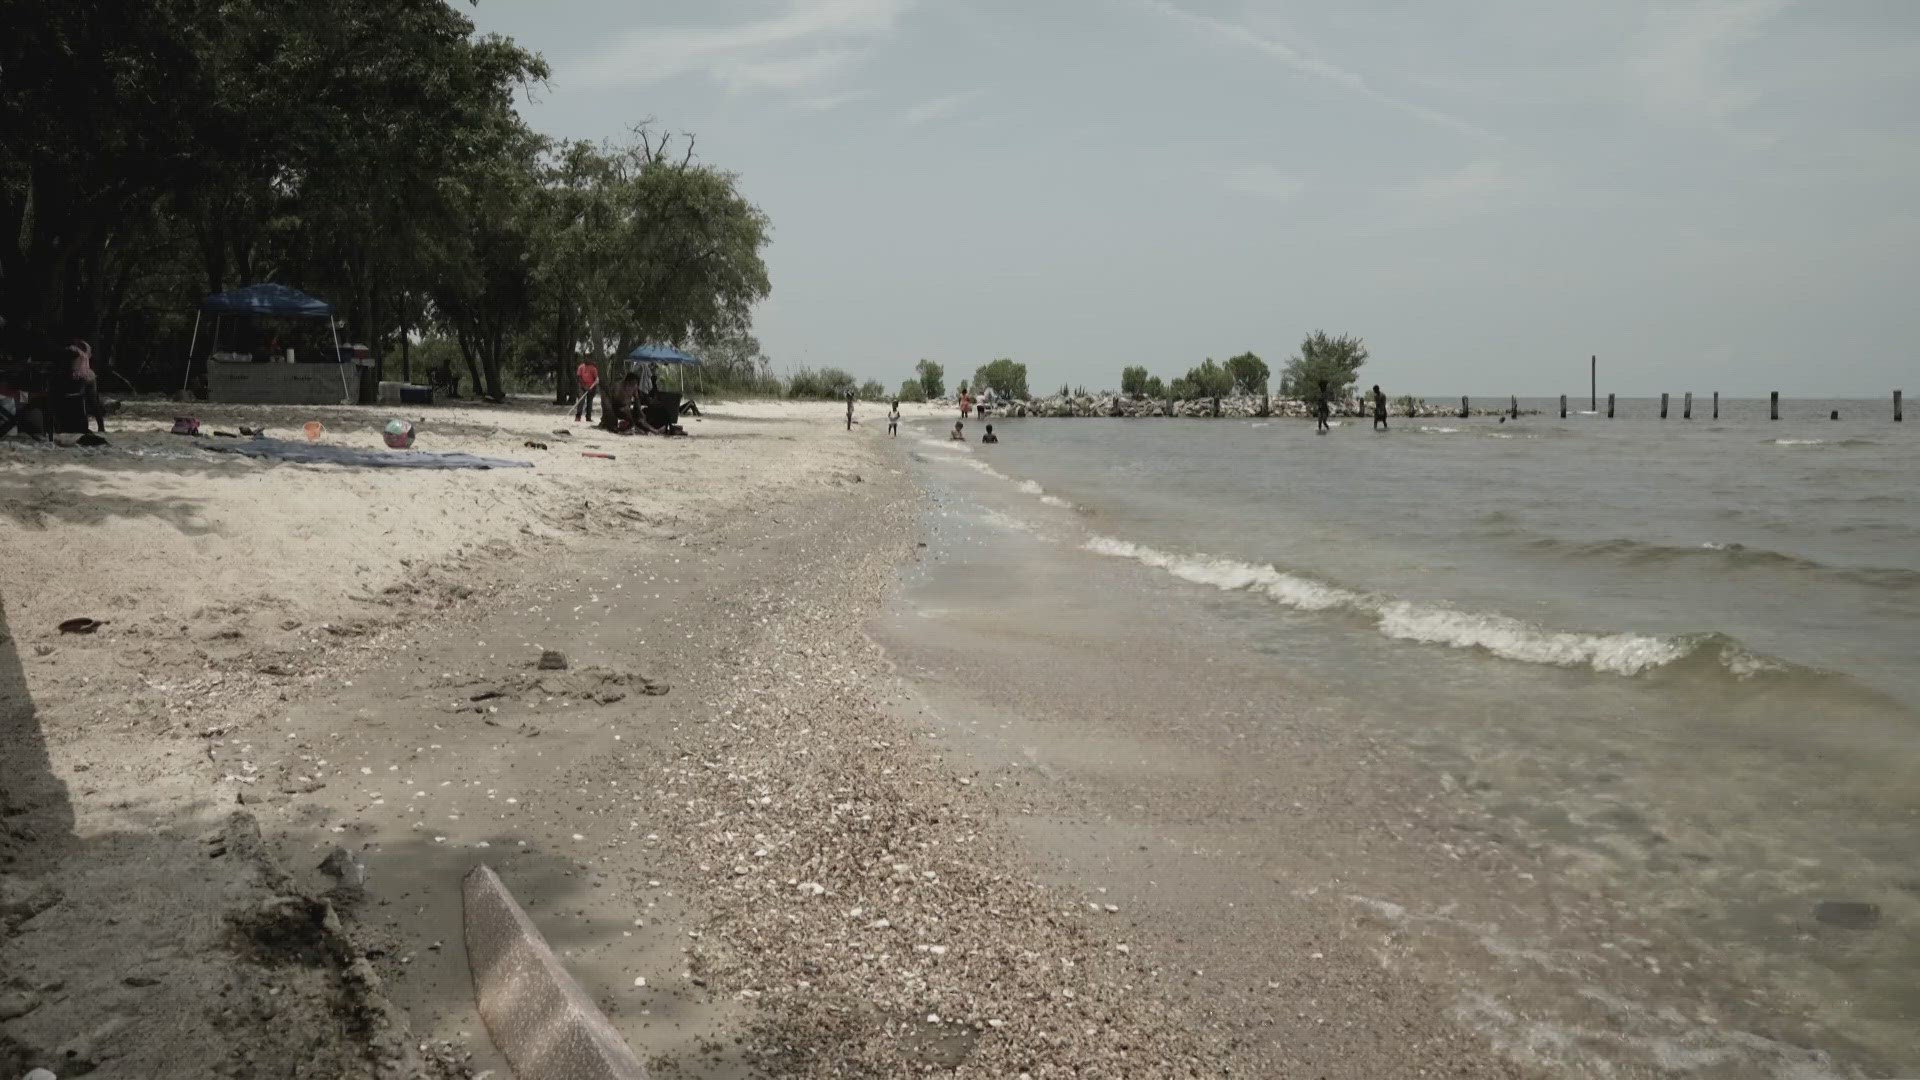 The New Orleans East community is working to revitalize the beach.